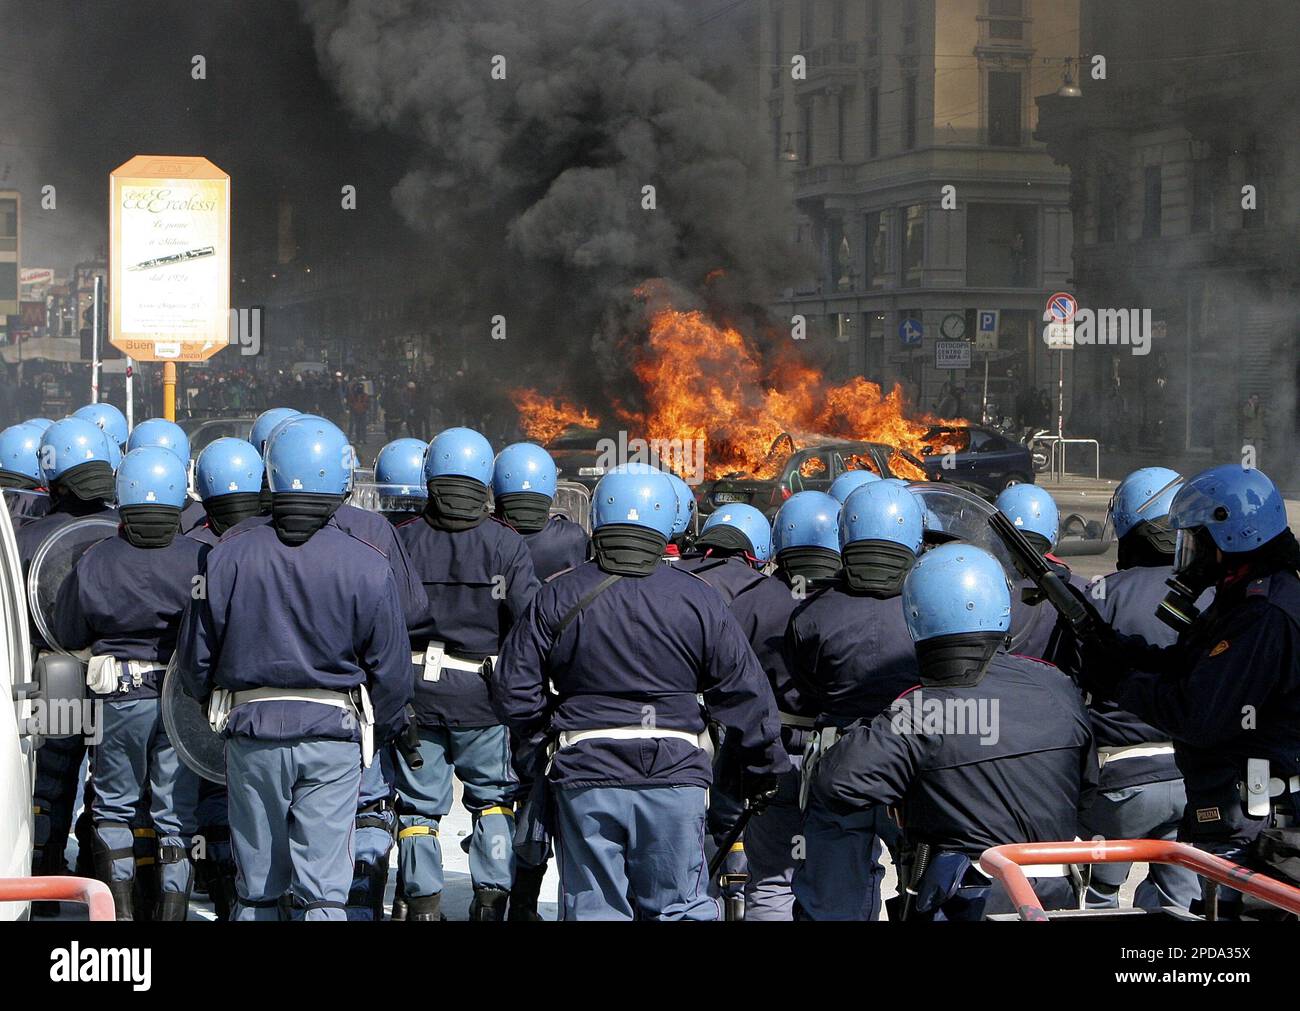 Italian police face demonstrators during clashes between police and  demonstrators in downtown Milan, Italy, Saturday, March 11, 2006. Police  clashed in Milan with youths from far-left social clubs who torched cars and